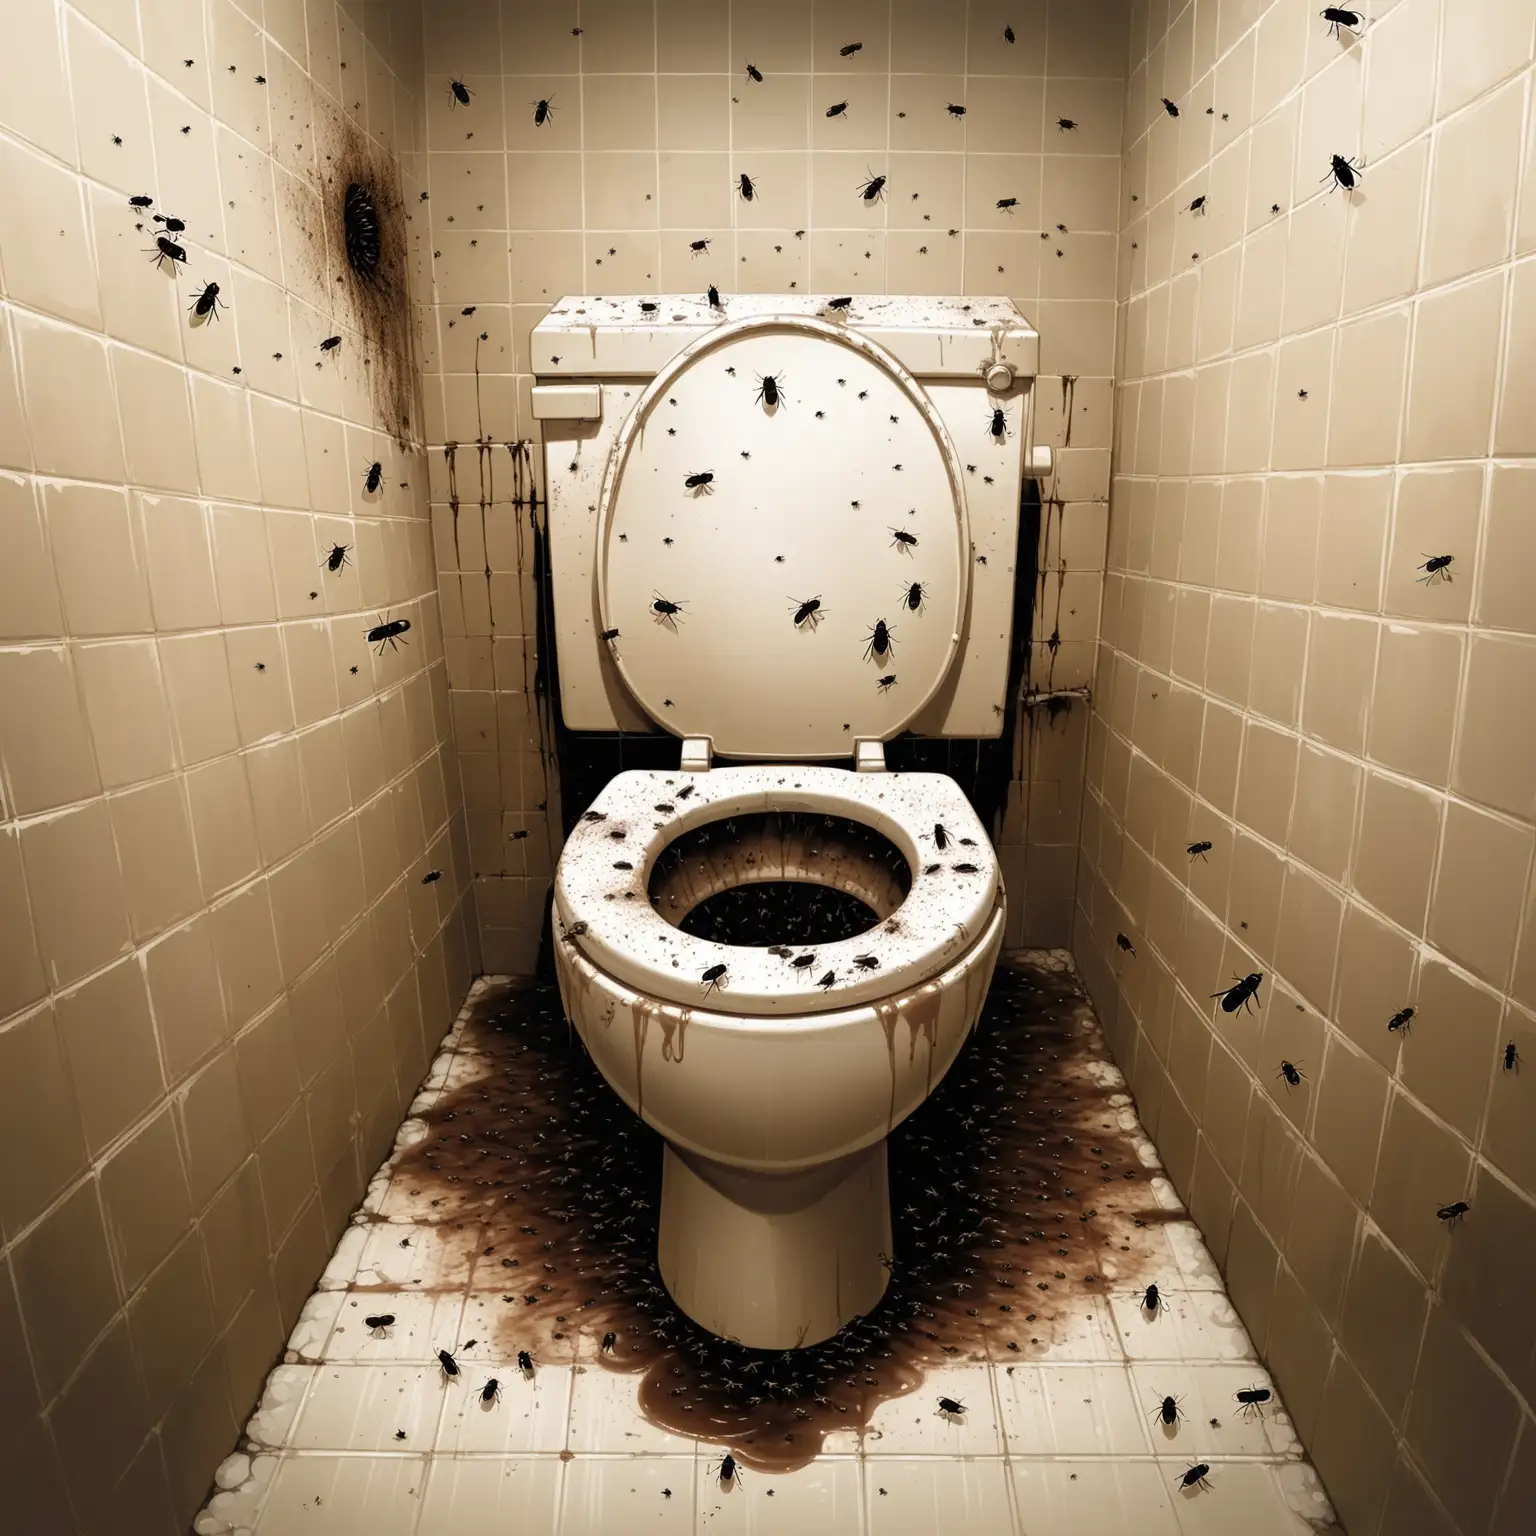 A filthy disgusting toilet with flies swirming around. album cover 